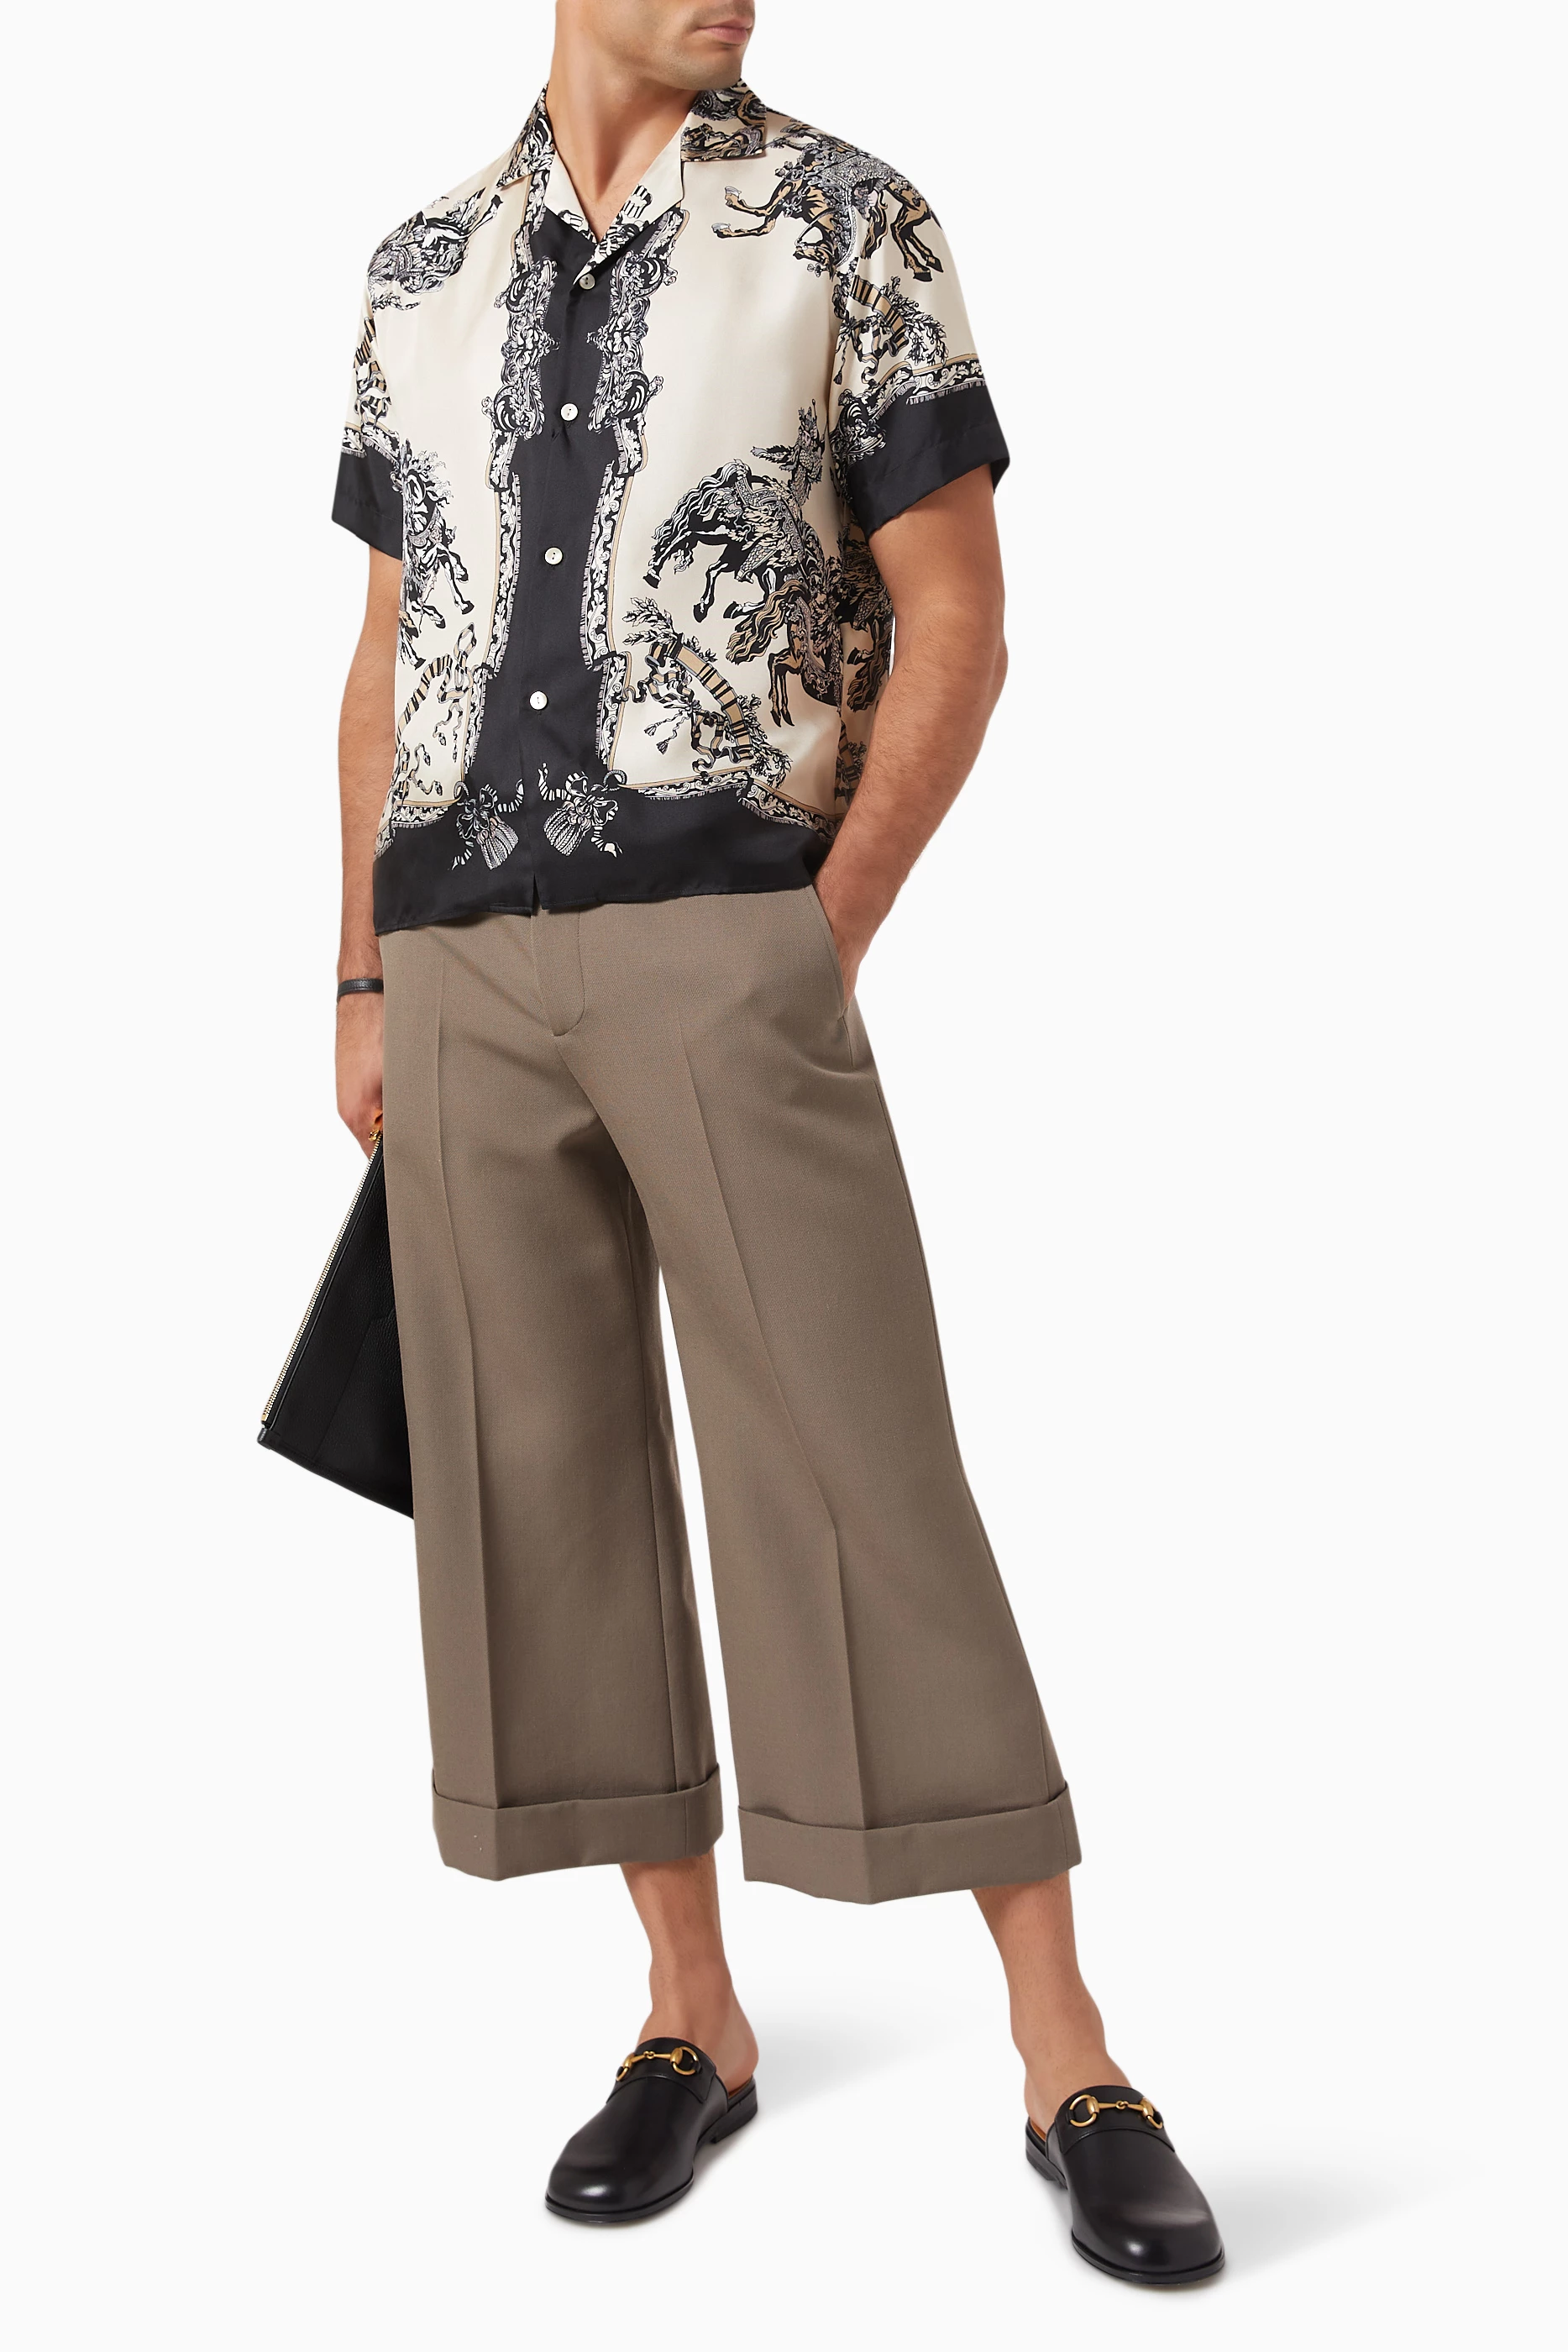 Gucci Silk Bowling Shirt With Jousting Print In Neutrals, ModeSens